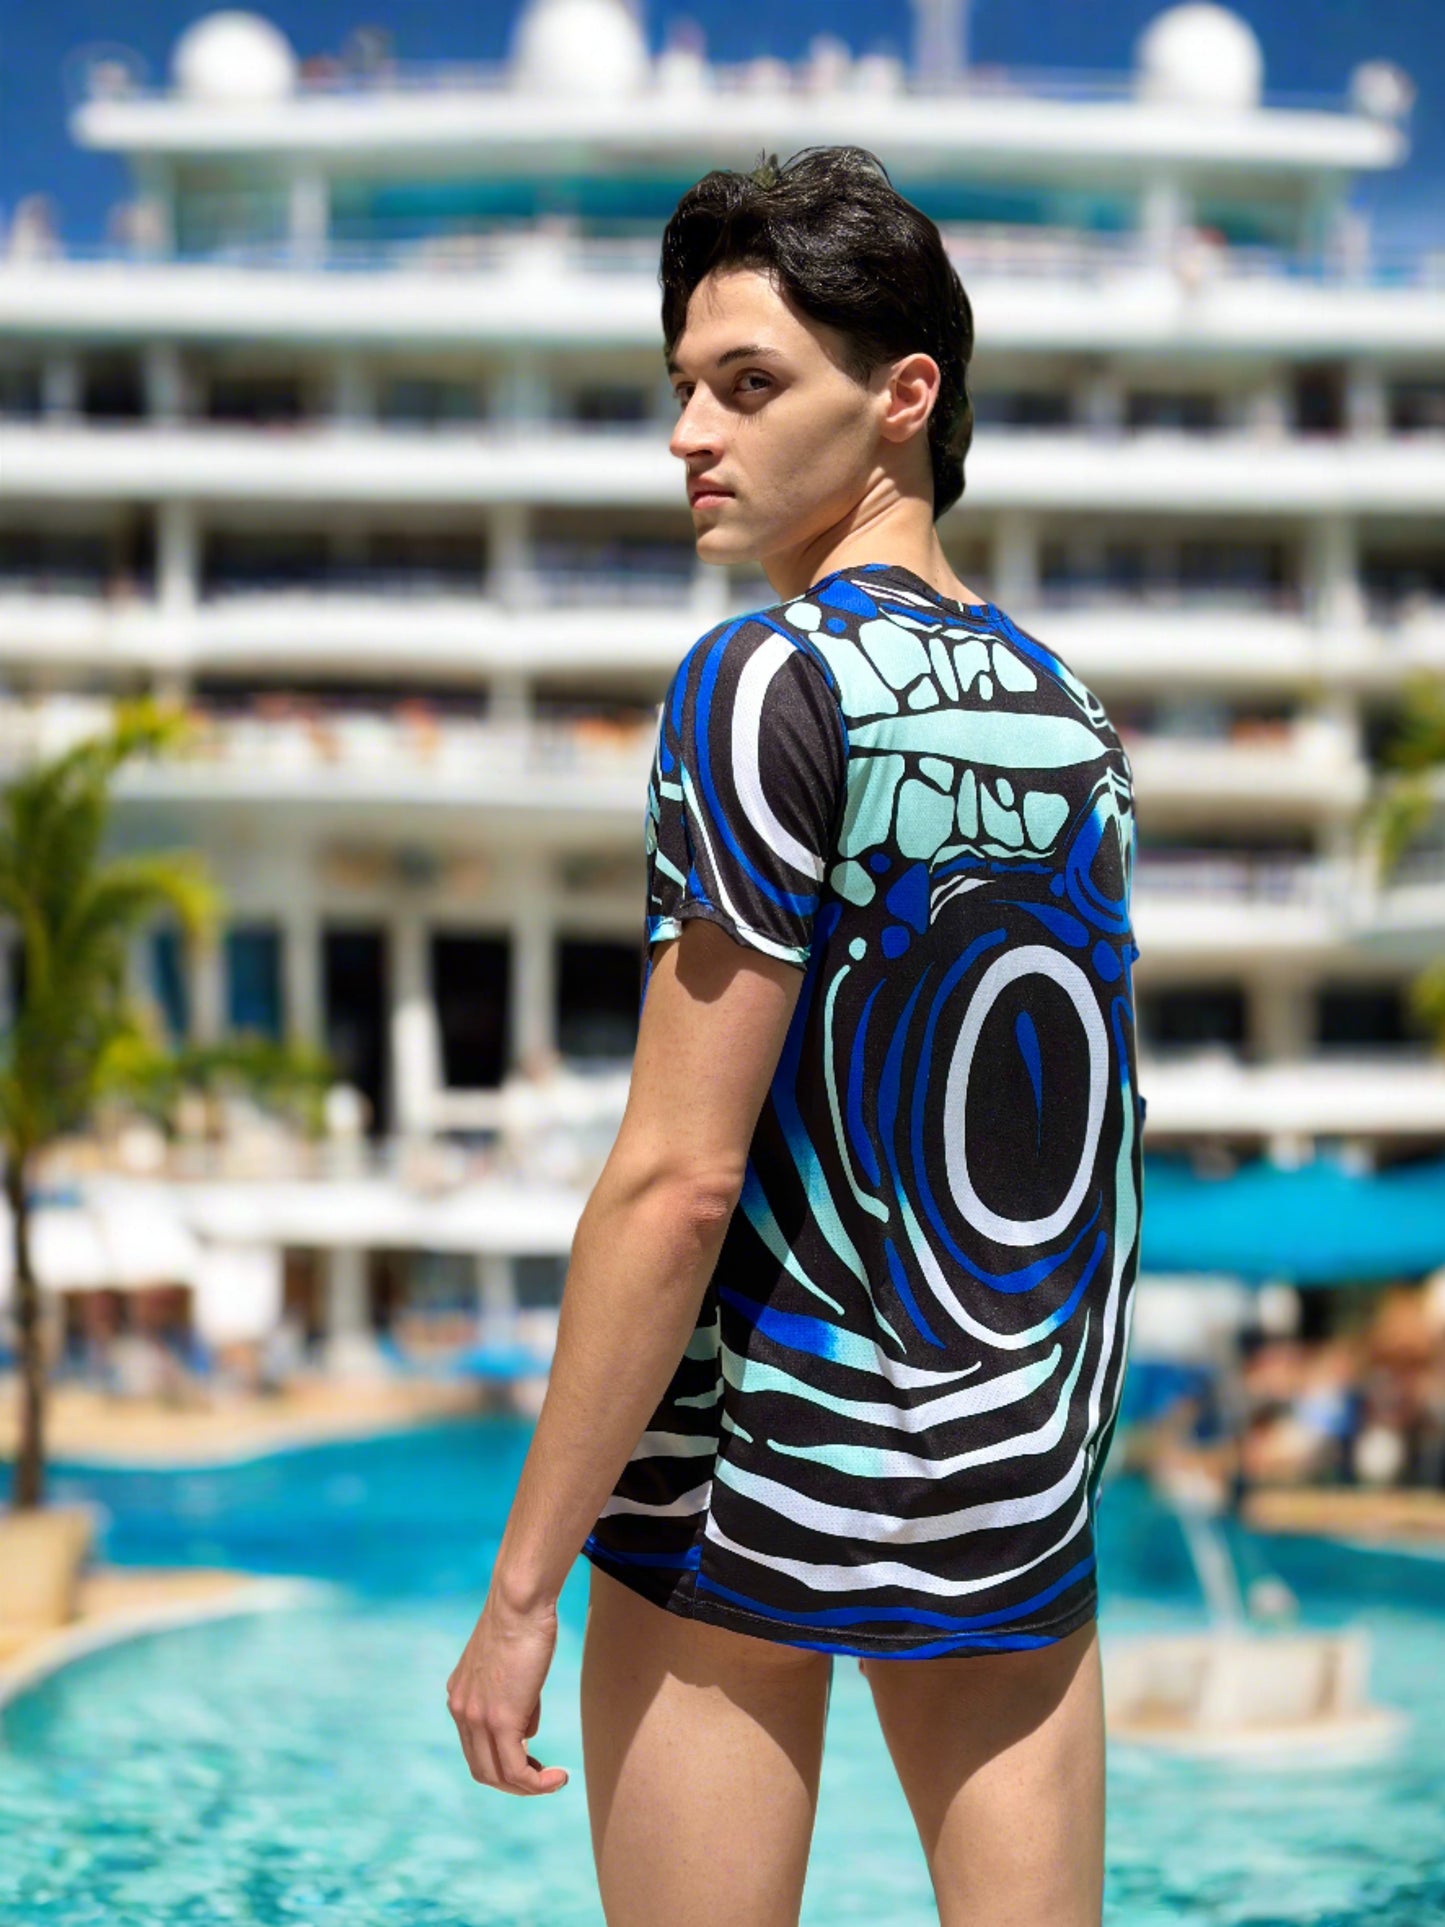 Our Angelfish Swim Brief for men and our coordinating Sport Shirt. The suit has a Speedo style cut. 